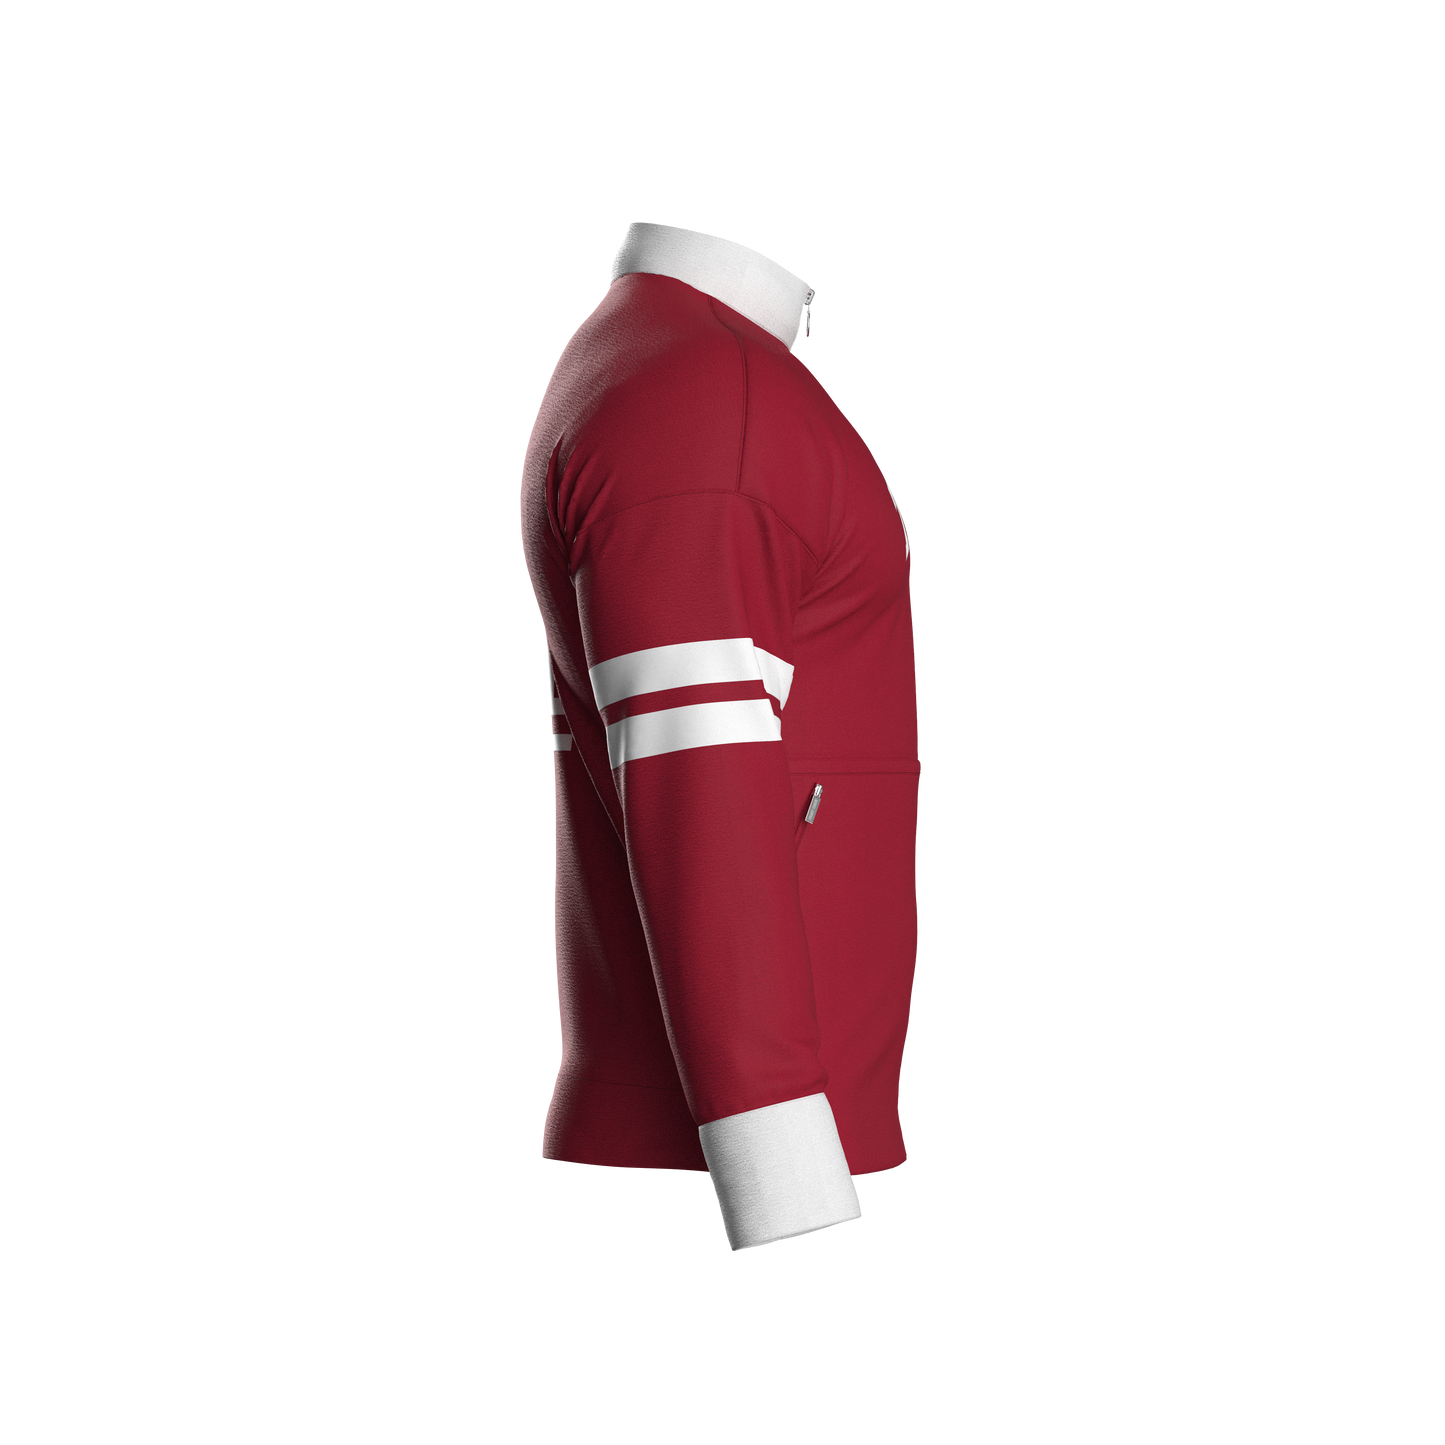 Temple University Home Zip-Up (youth)